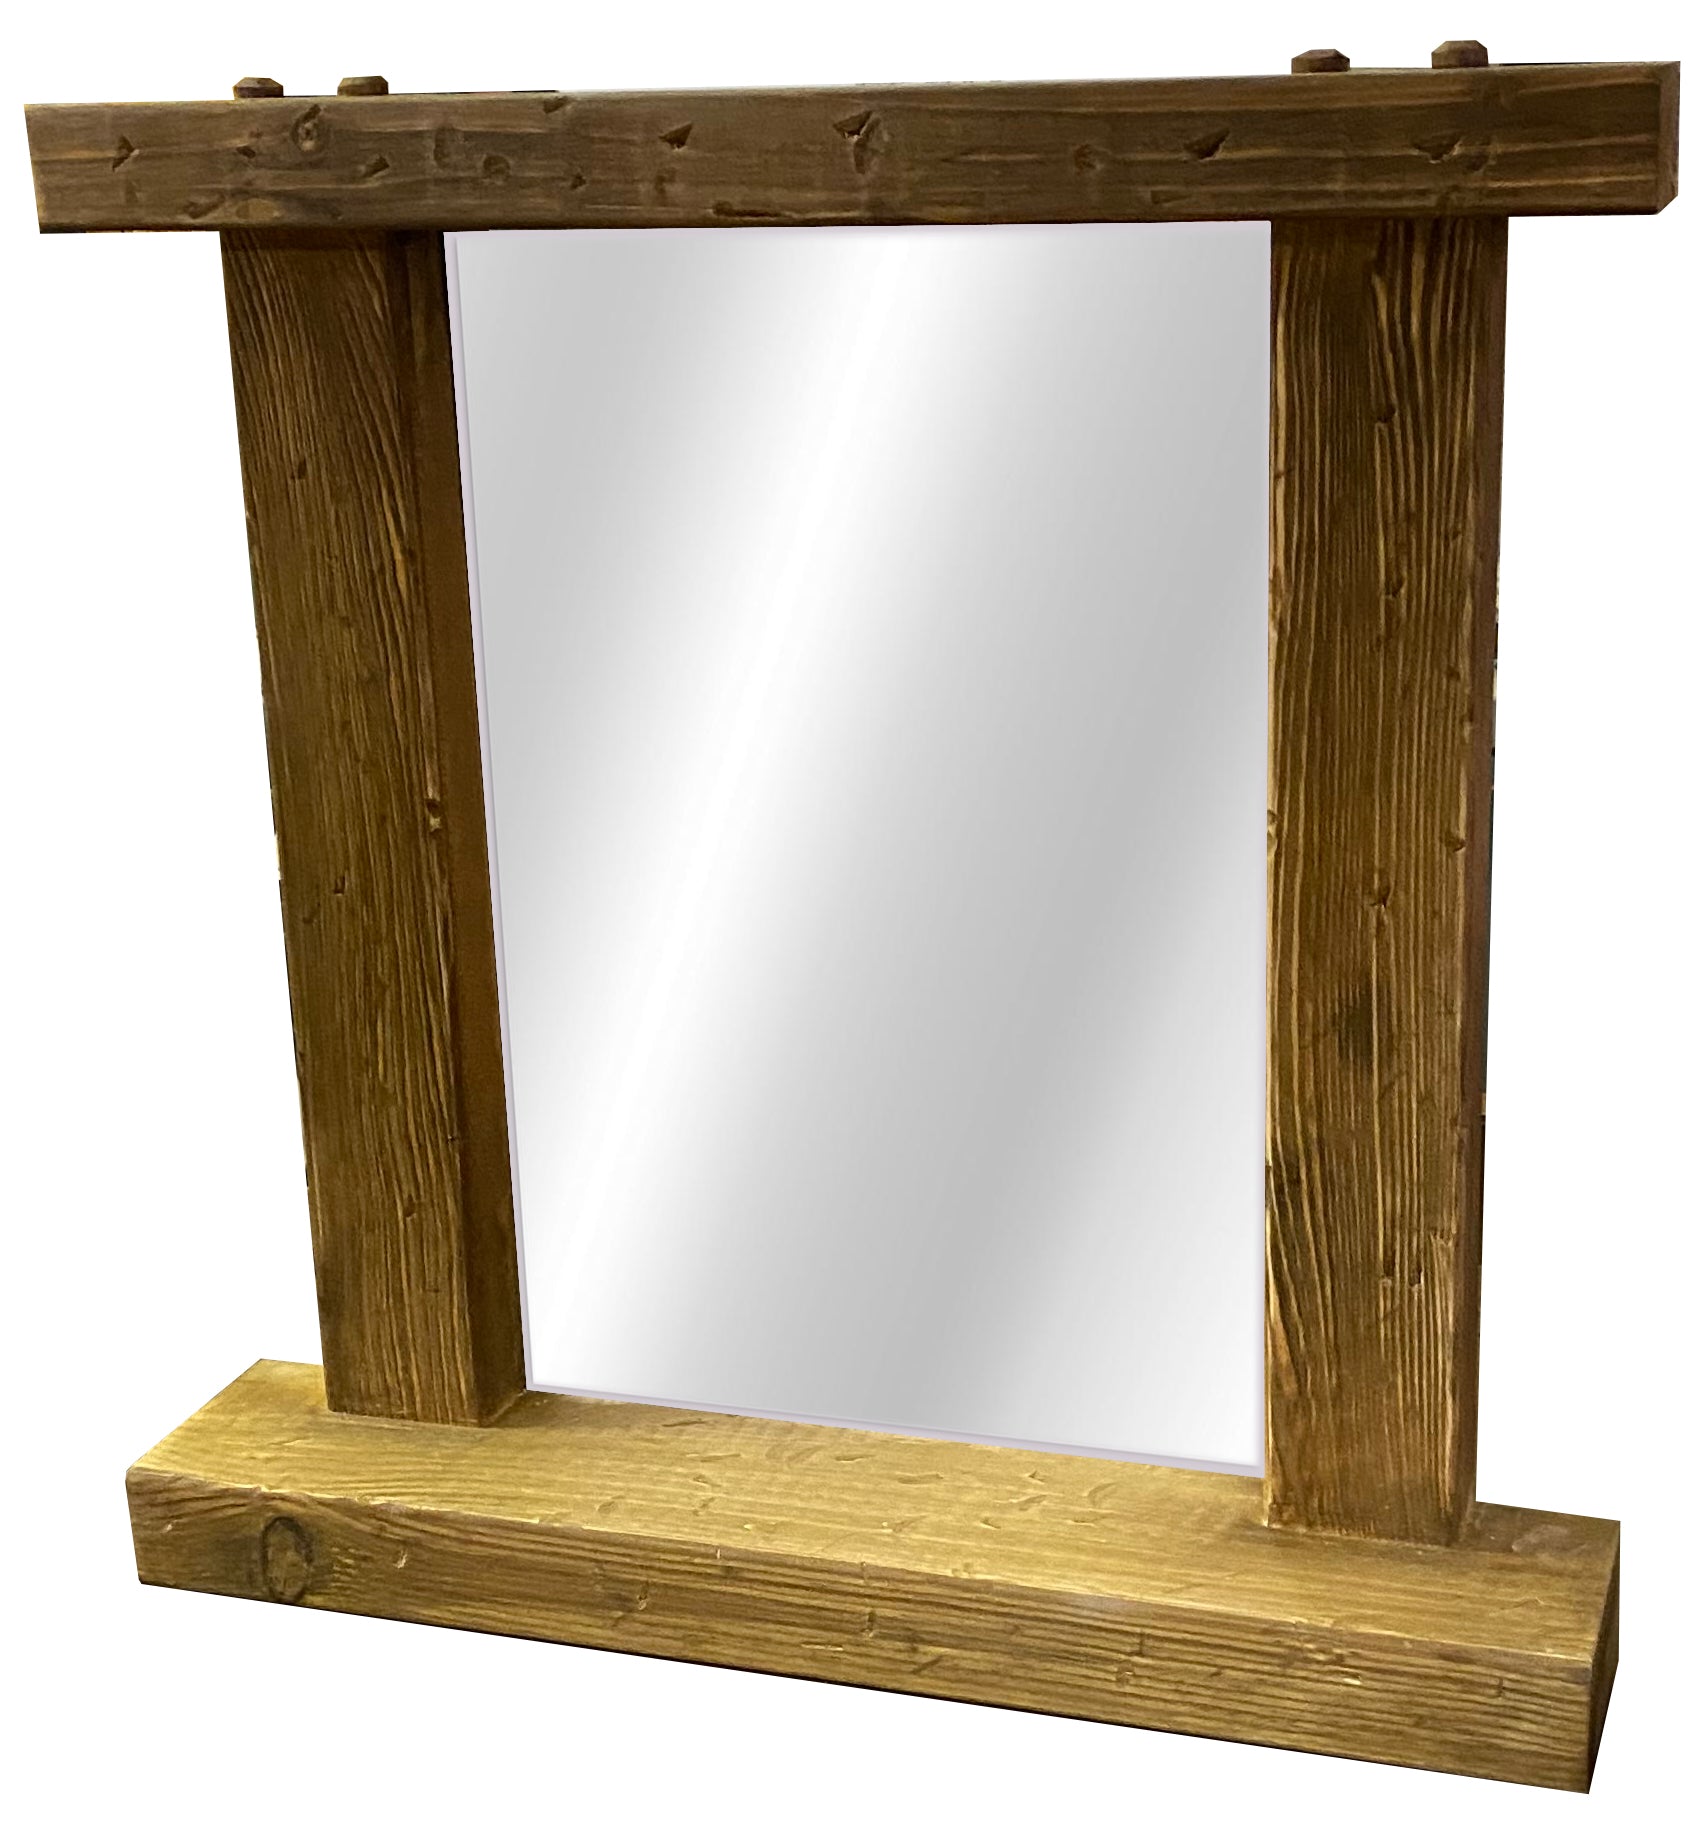 Beautiful and useful mirror in natural driftwood mirror, complete with shelf